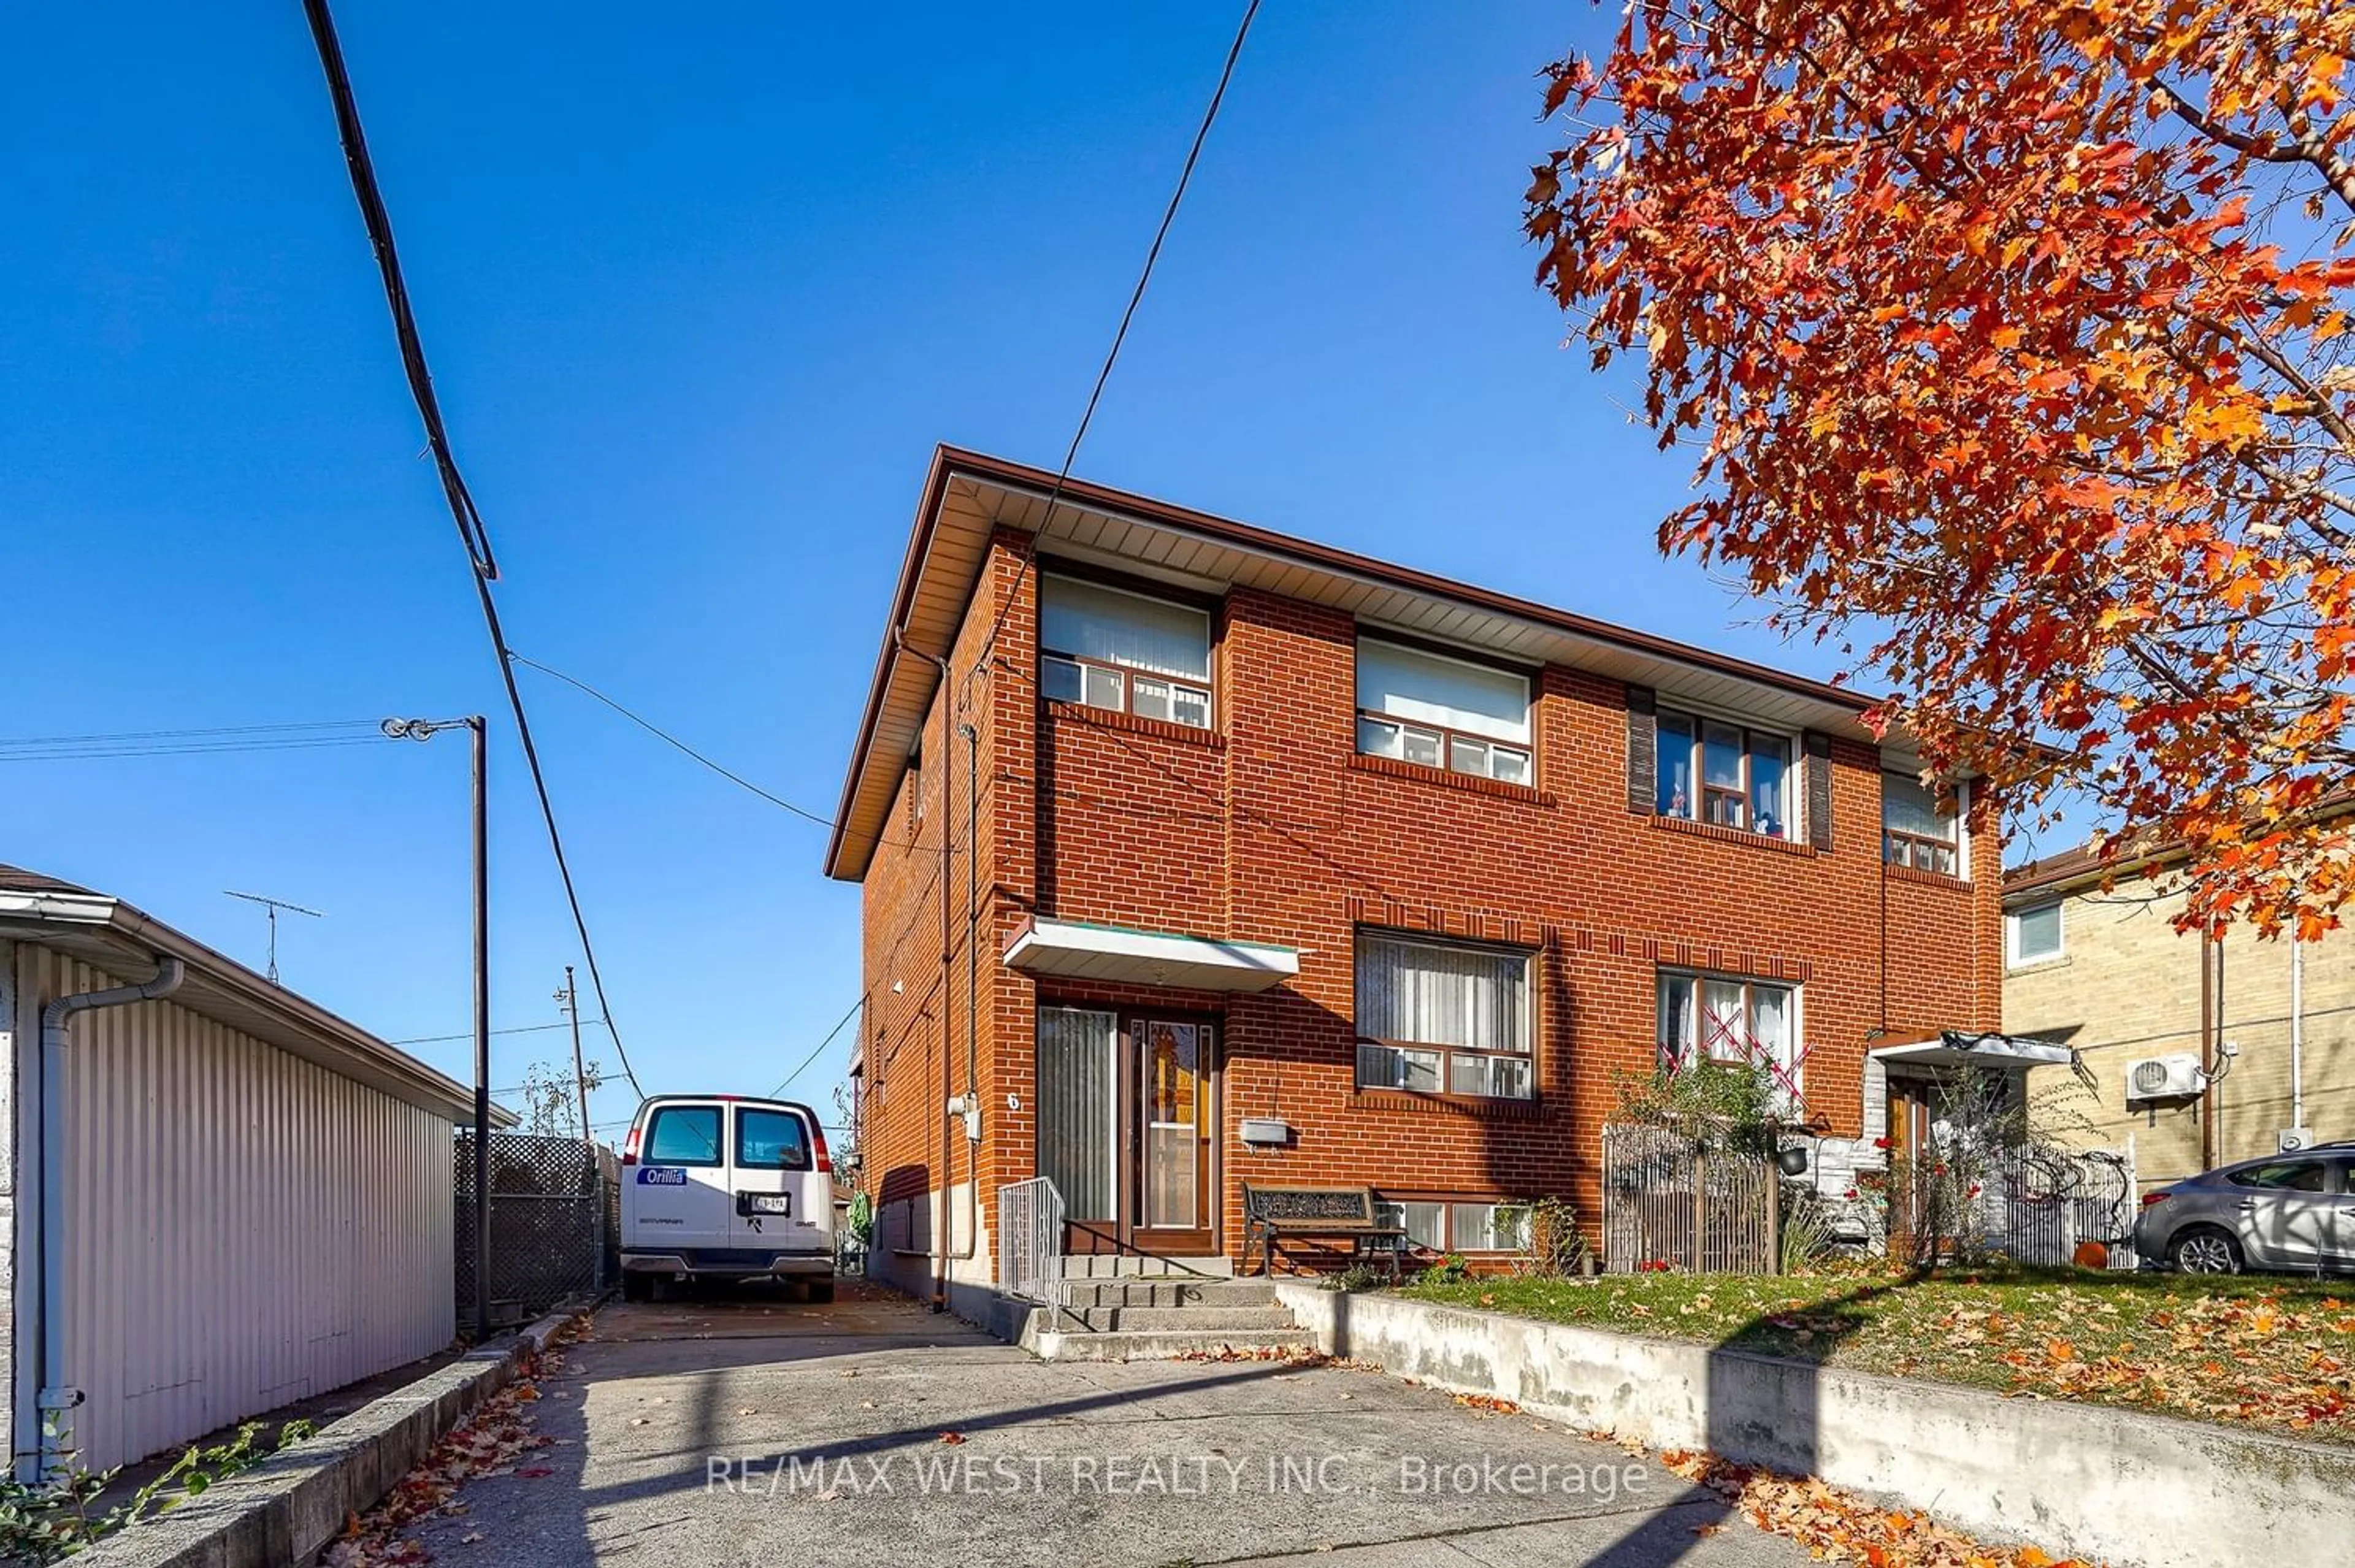 Home with brick exterior material for 6 Dalrymple Dr, Toronto Ontario M6N 4S3